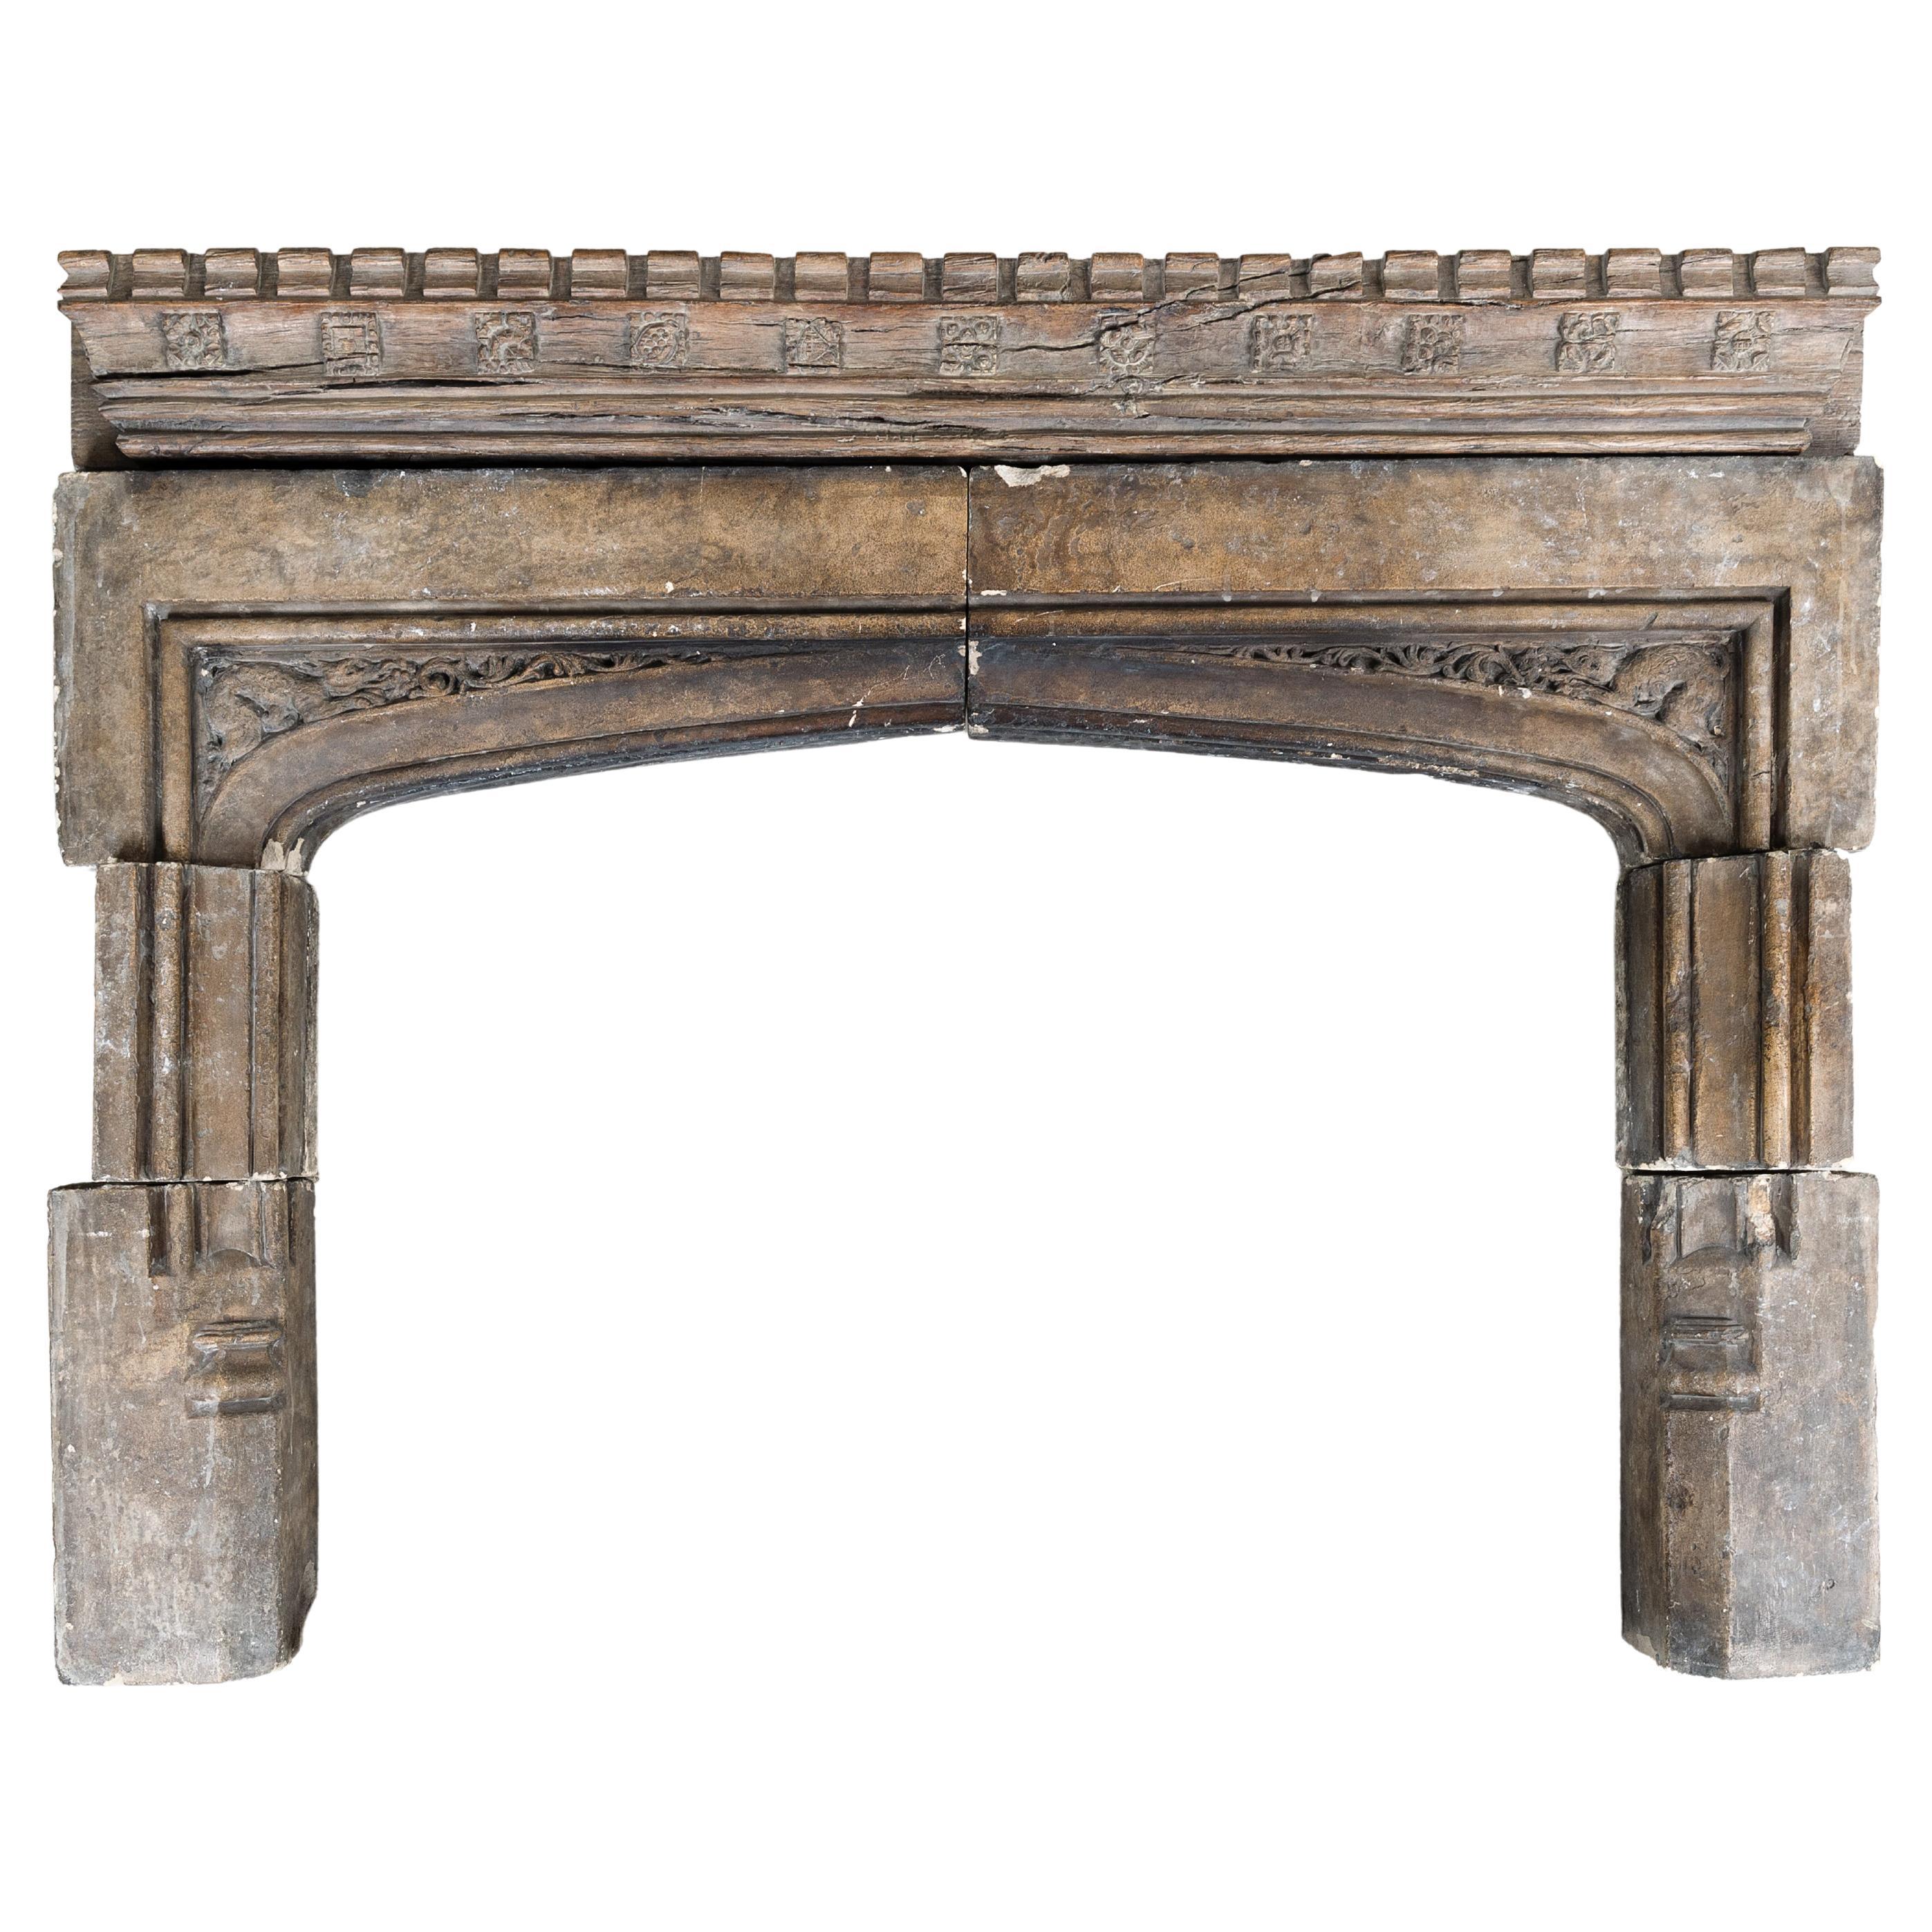 Tudor Arched Stone Recessed Fireplace